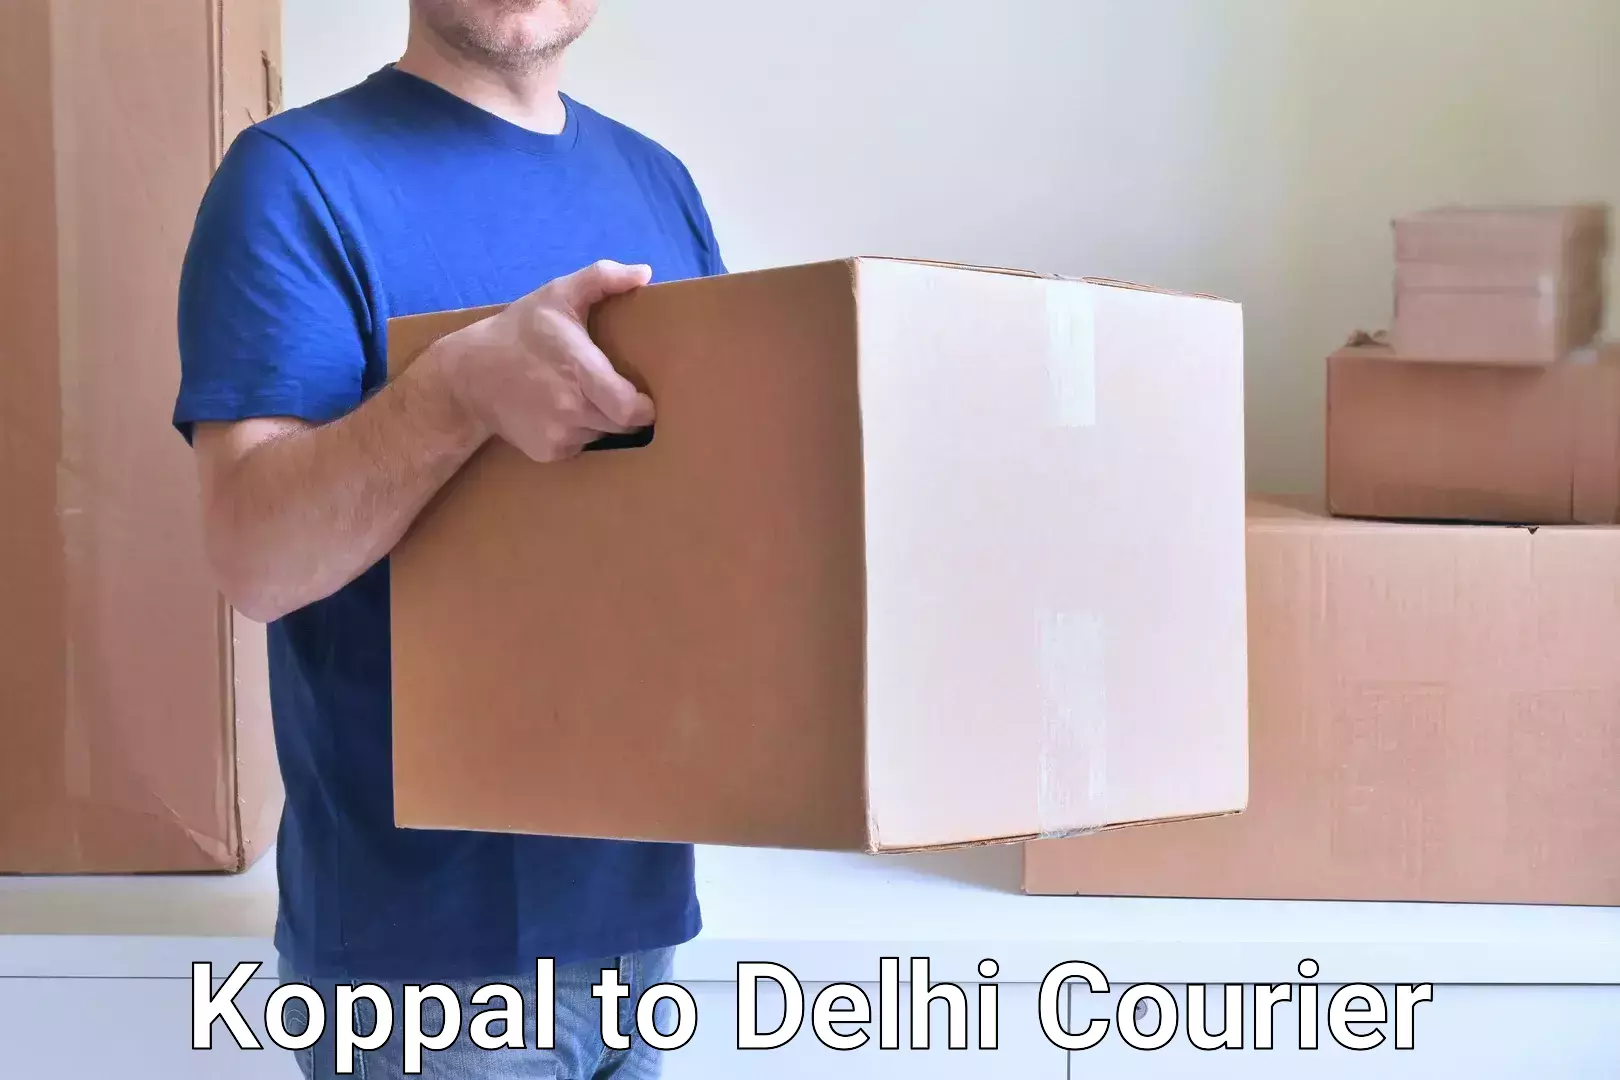 Next-day delivery options Koppal to Delhi